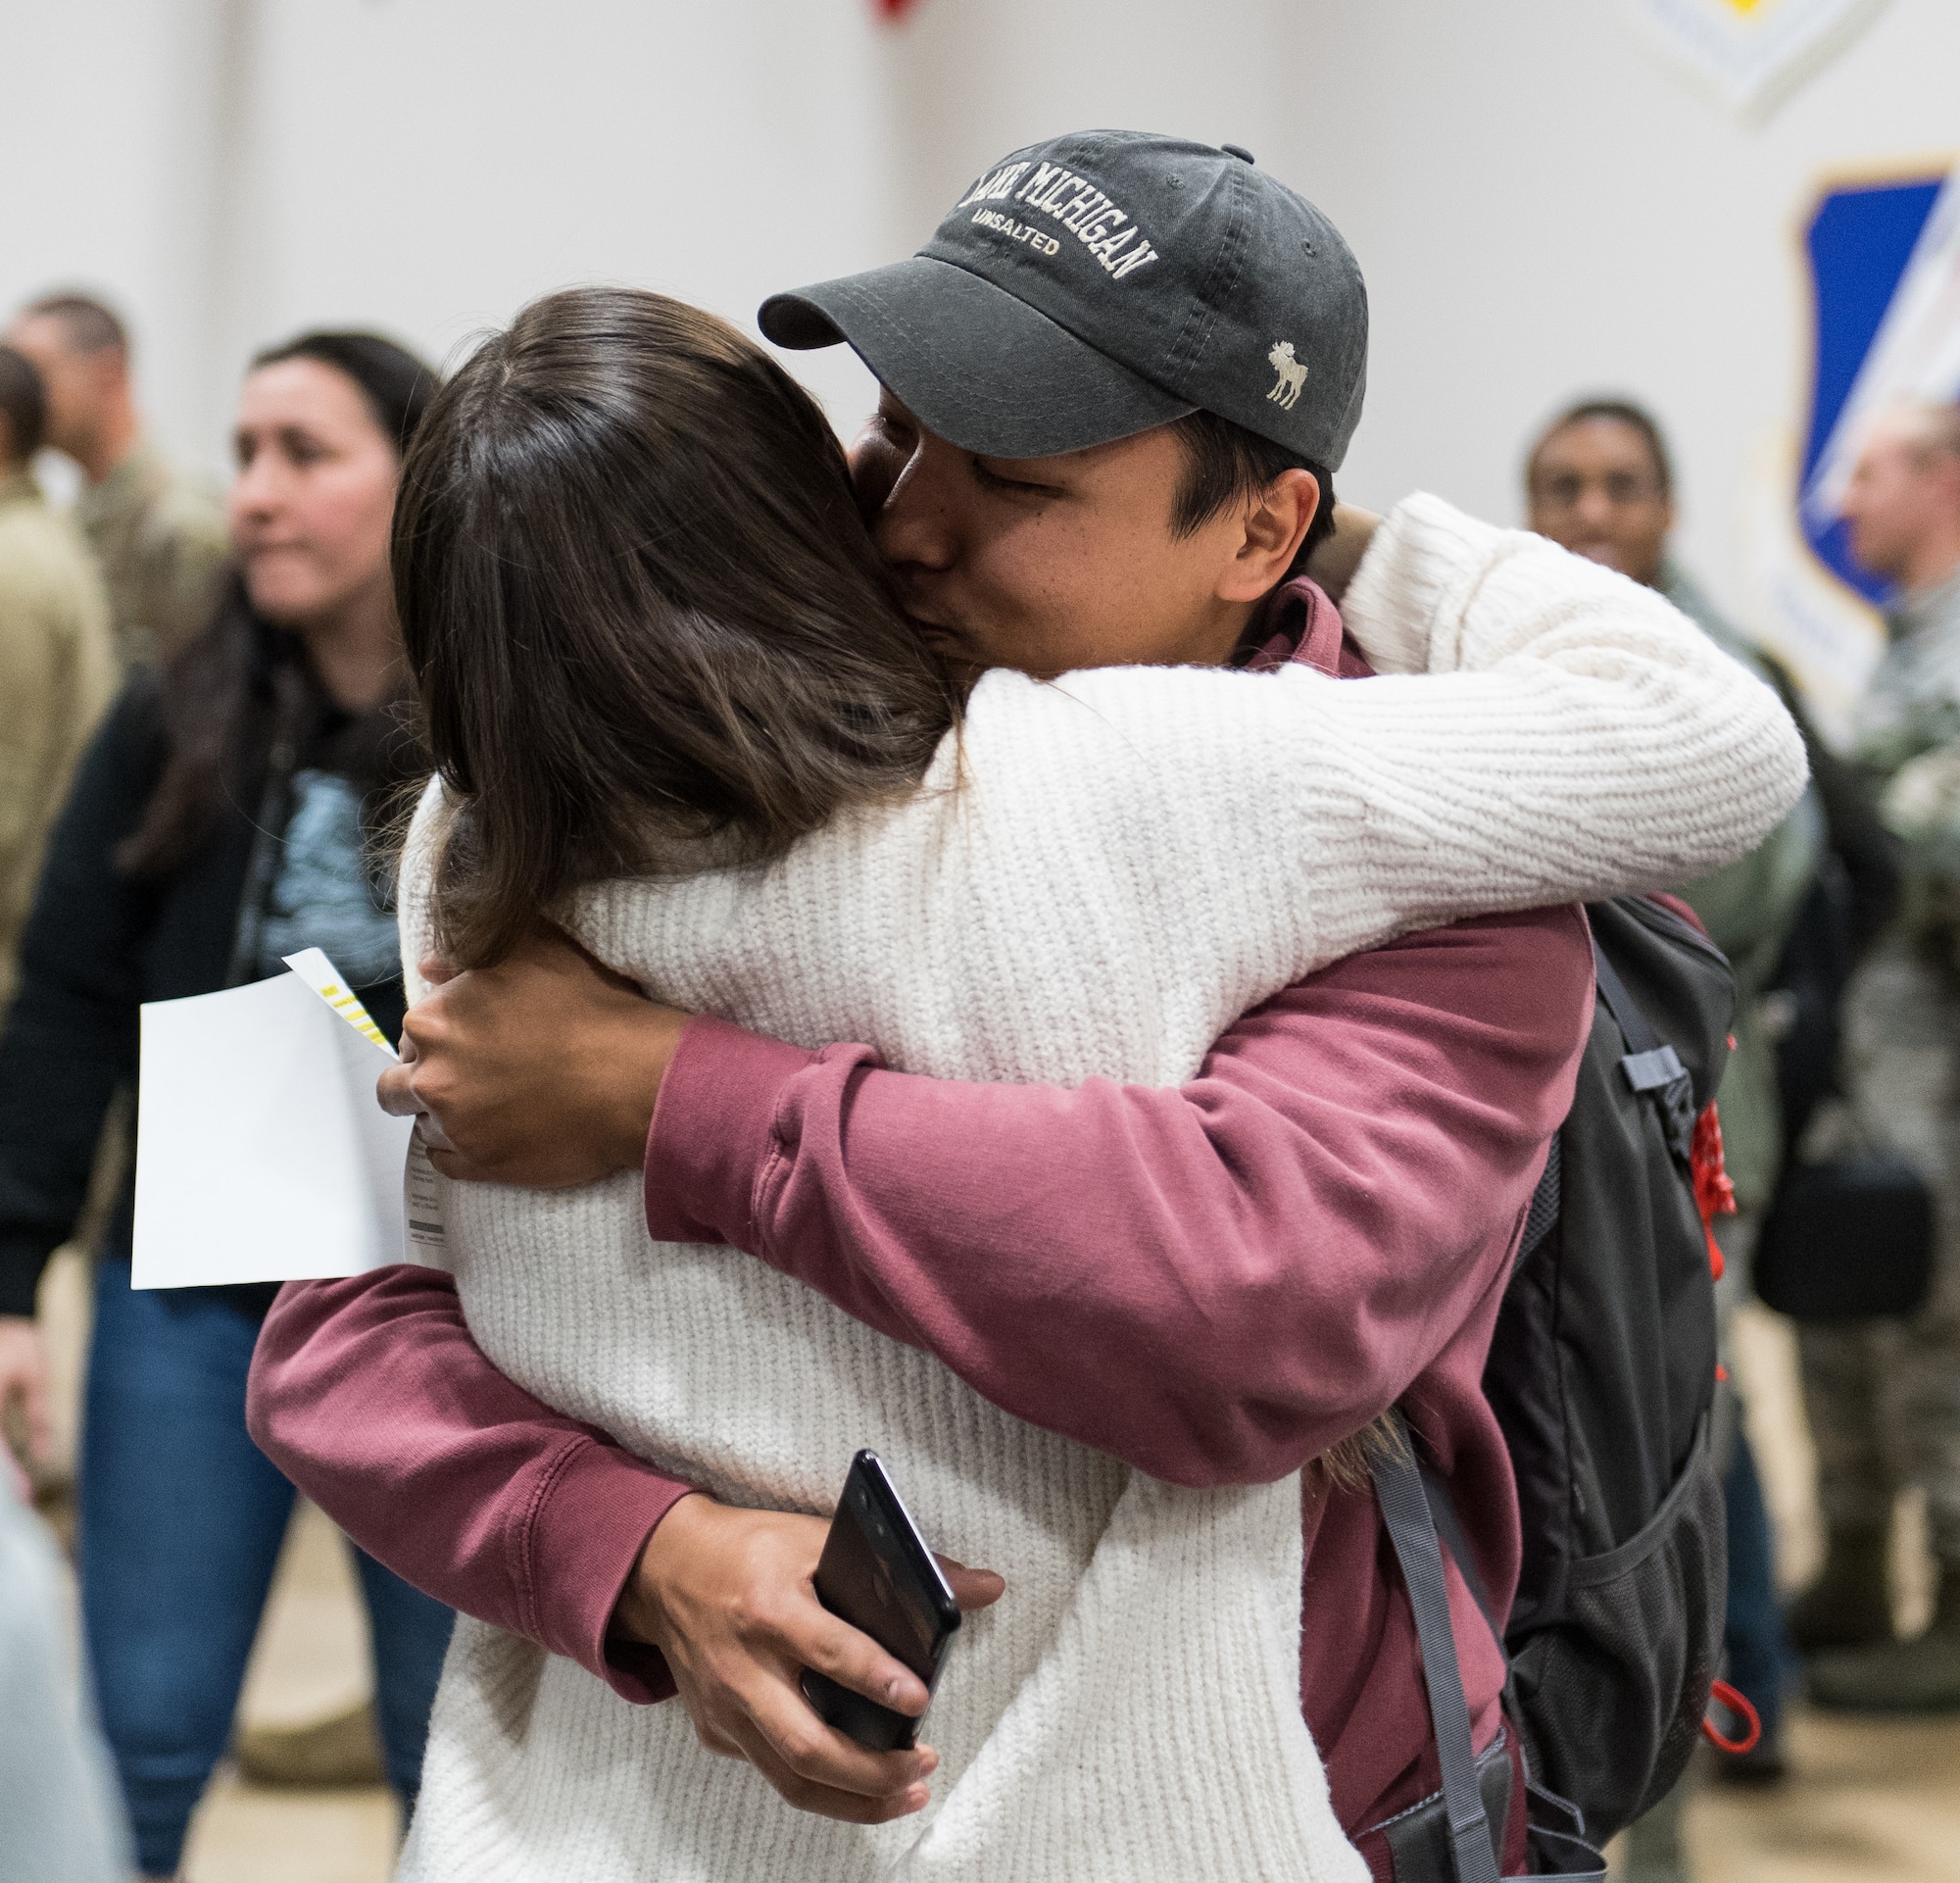 An Airman assigned to the 2nd Bomb Wing reunites with a loved one after returning from a short-term deployment to RAF Fairford, England, Nov. 14, 2019, at Barksdale Air Force Base, La. Over 300 Airmen and four B-52H Stratofortress aircraft were deployed in support of U.S. Strategic Command's Bomber Task Force. (U.S. Air Force photo by Airman 1st Class Lillian Miller)